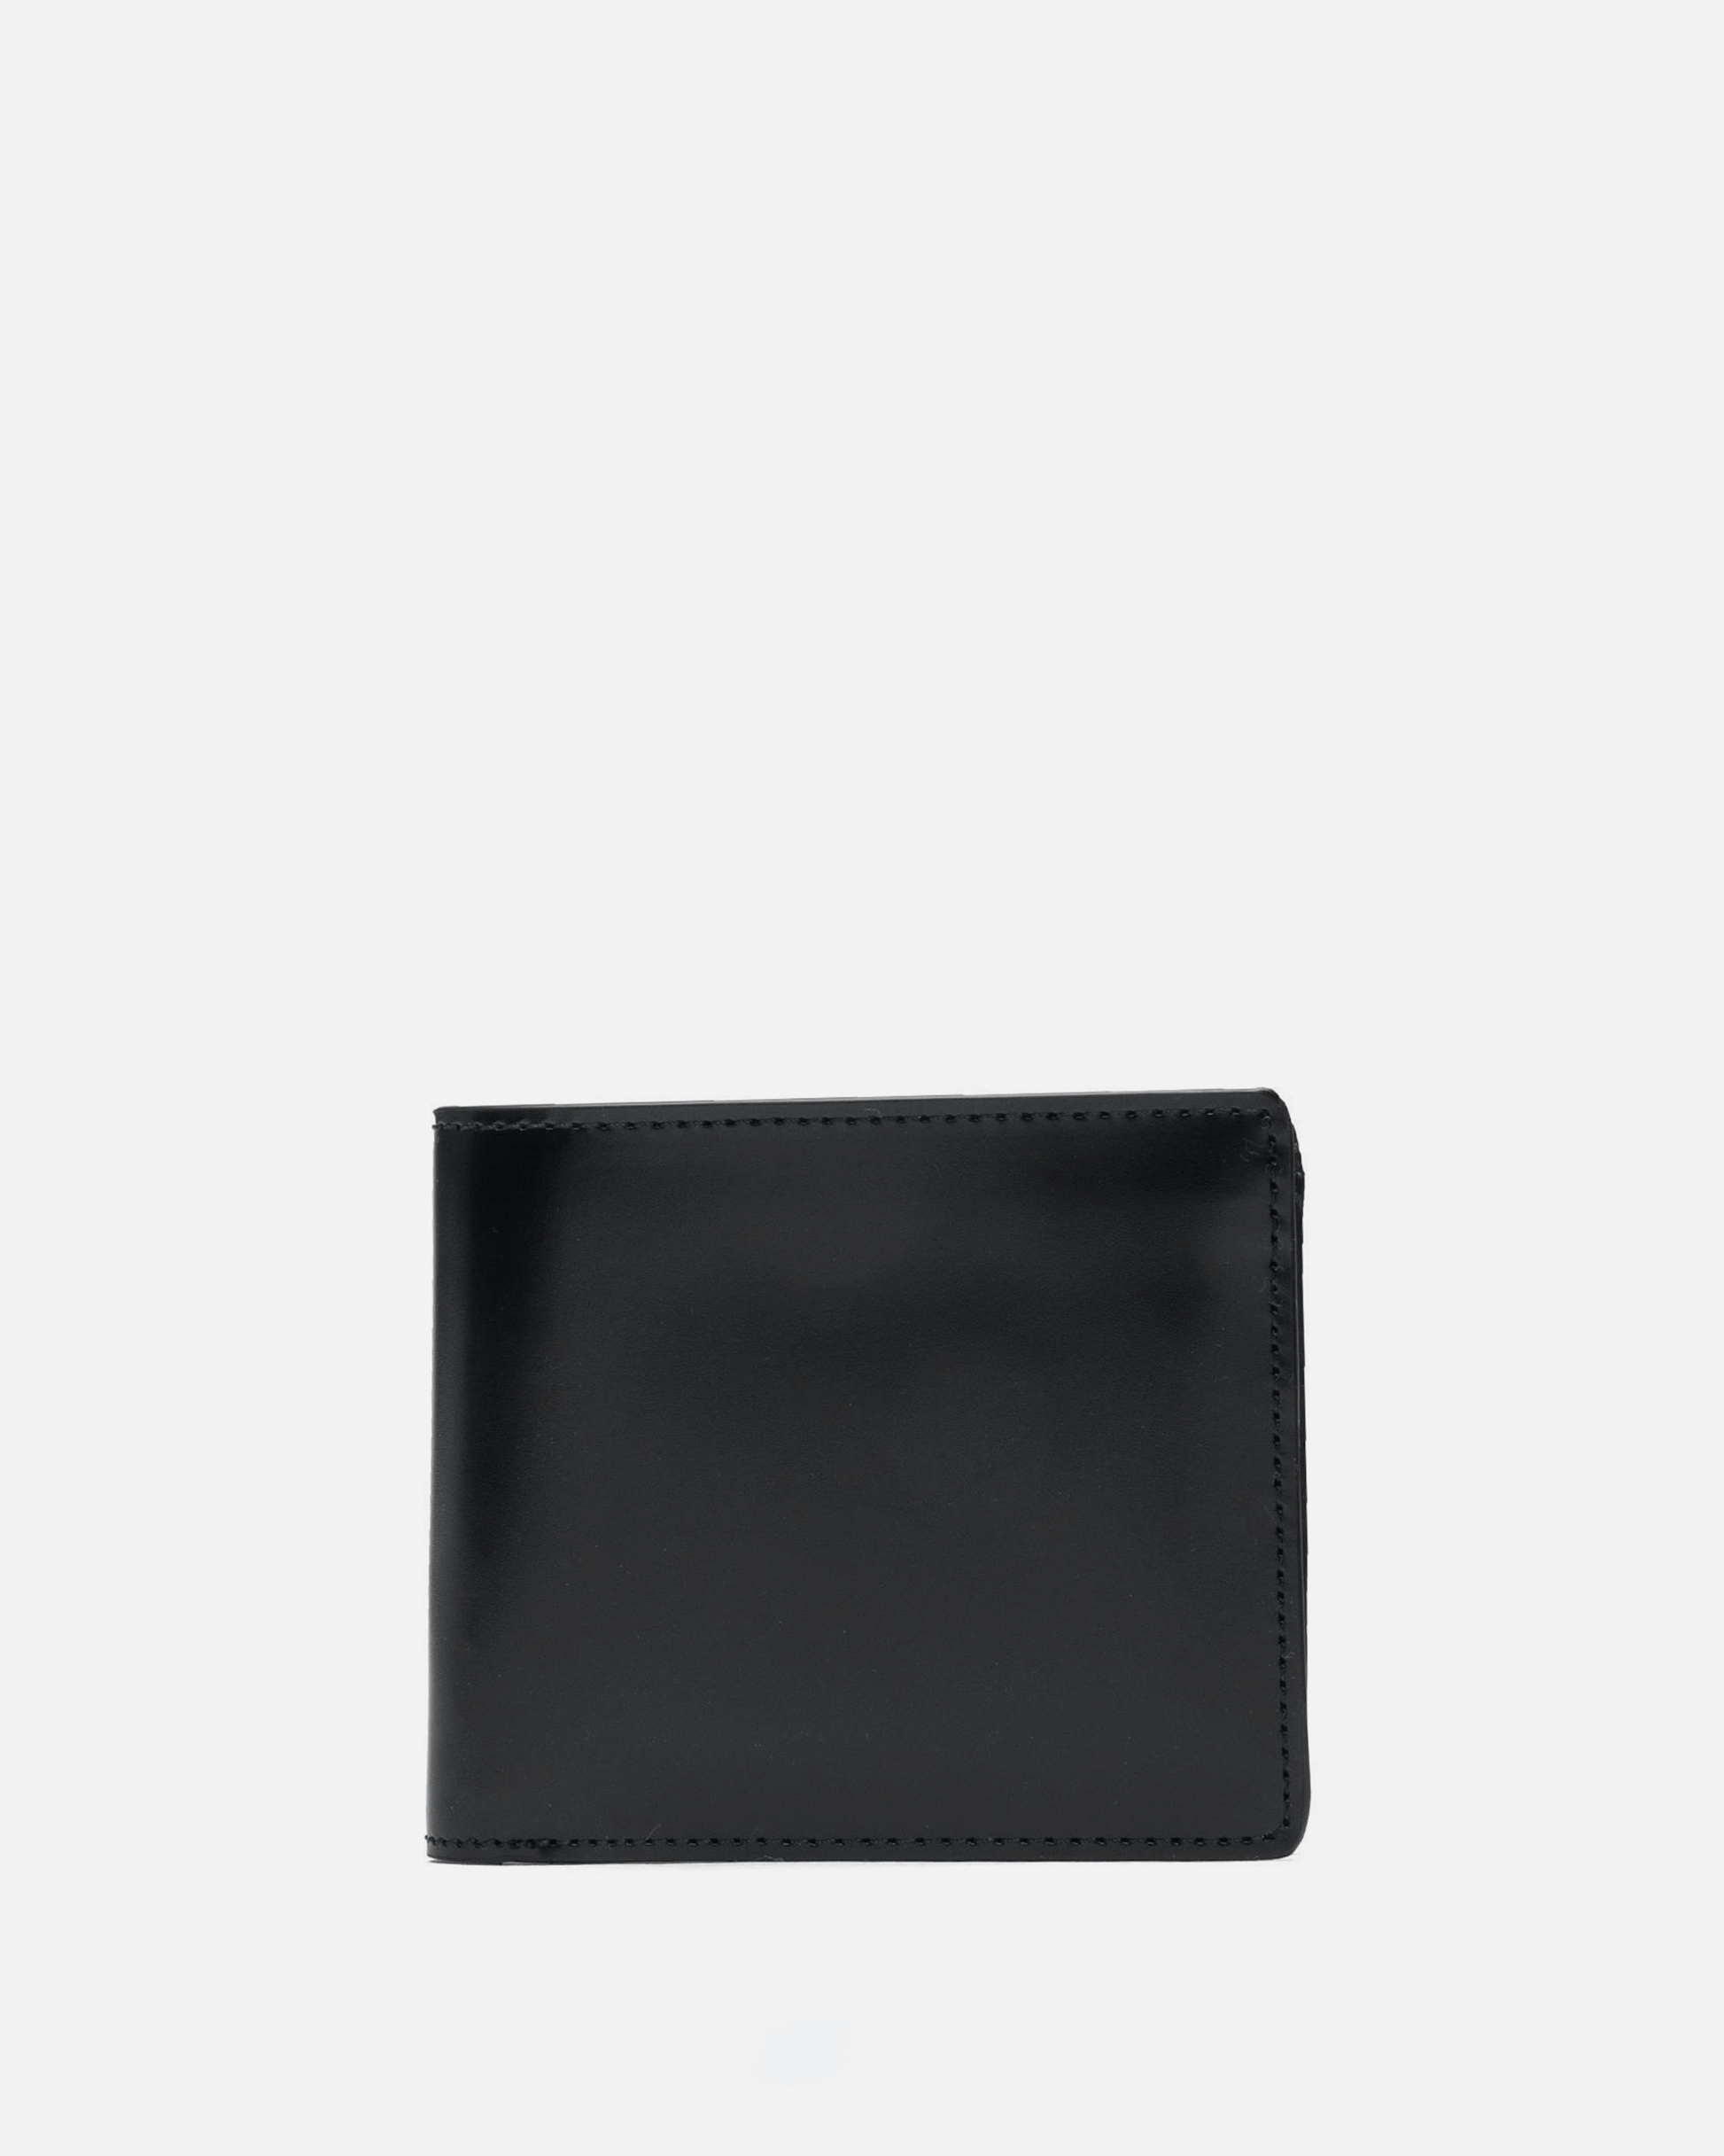 Maison Margiela Leather Goods Leather Bifold in Black